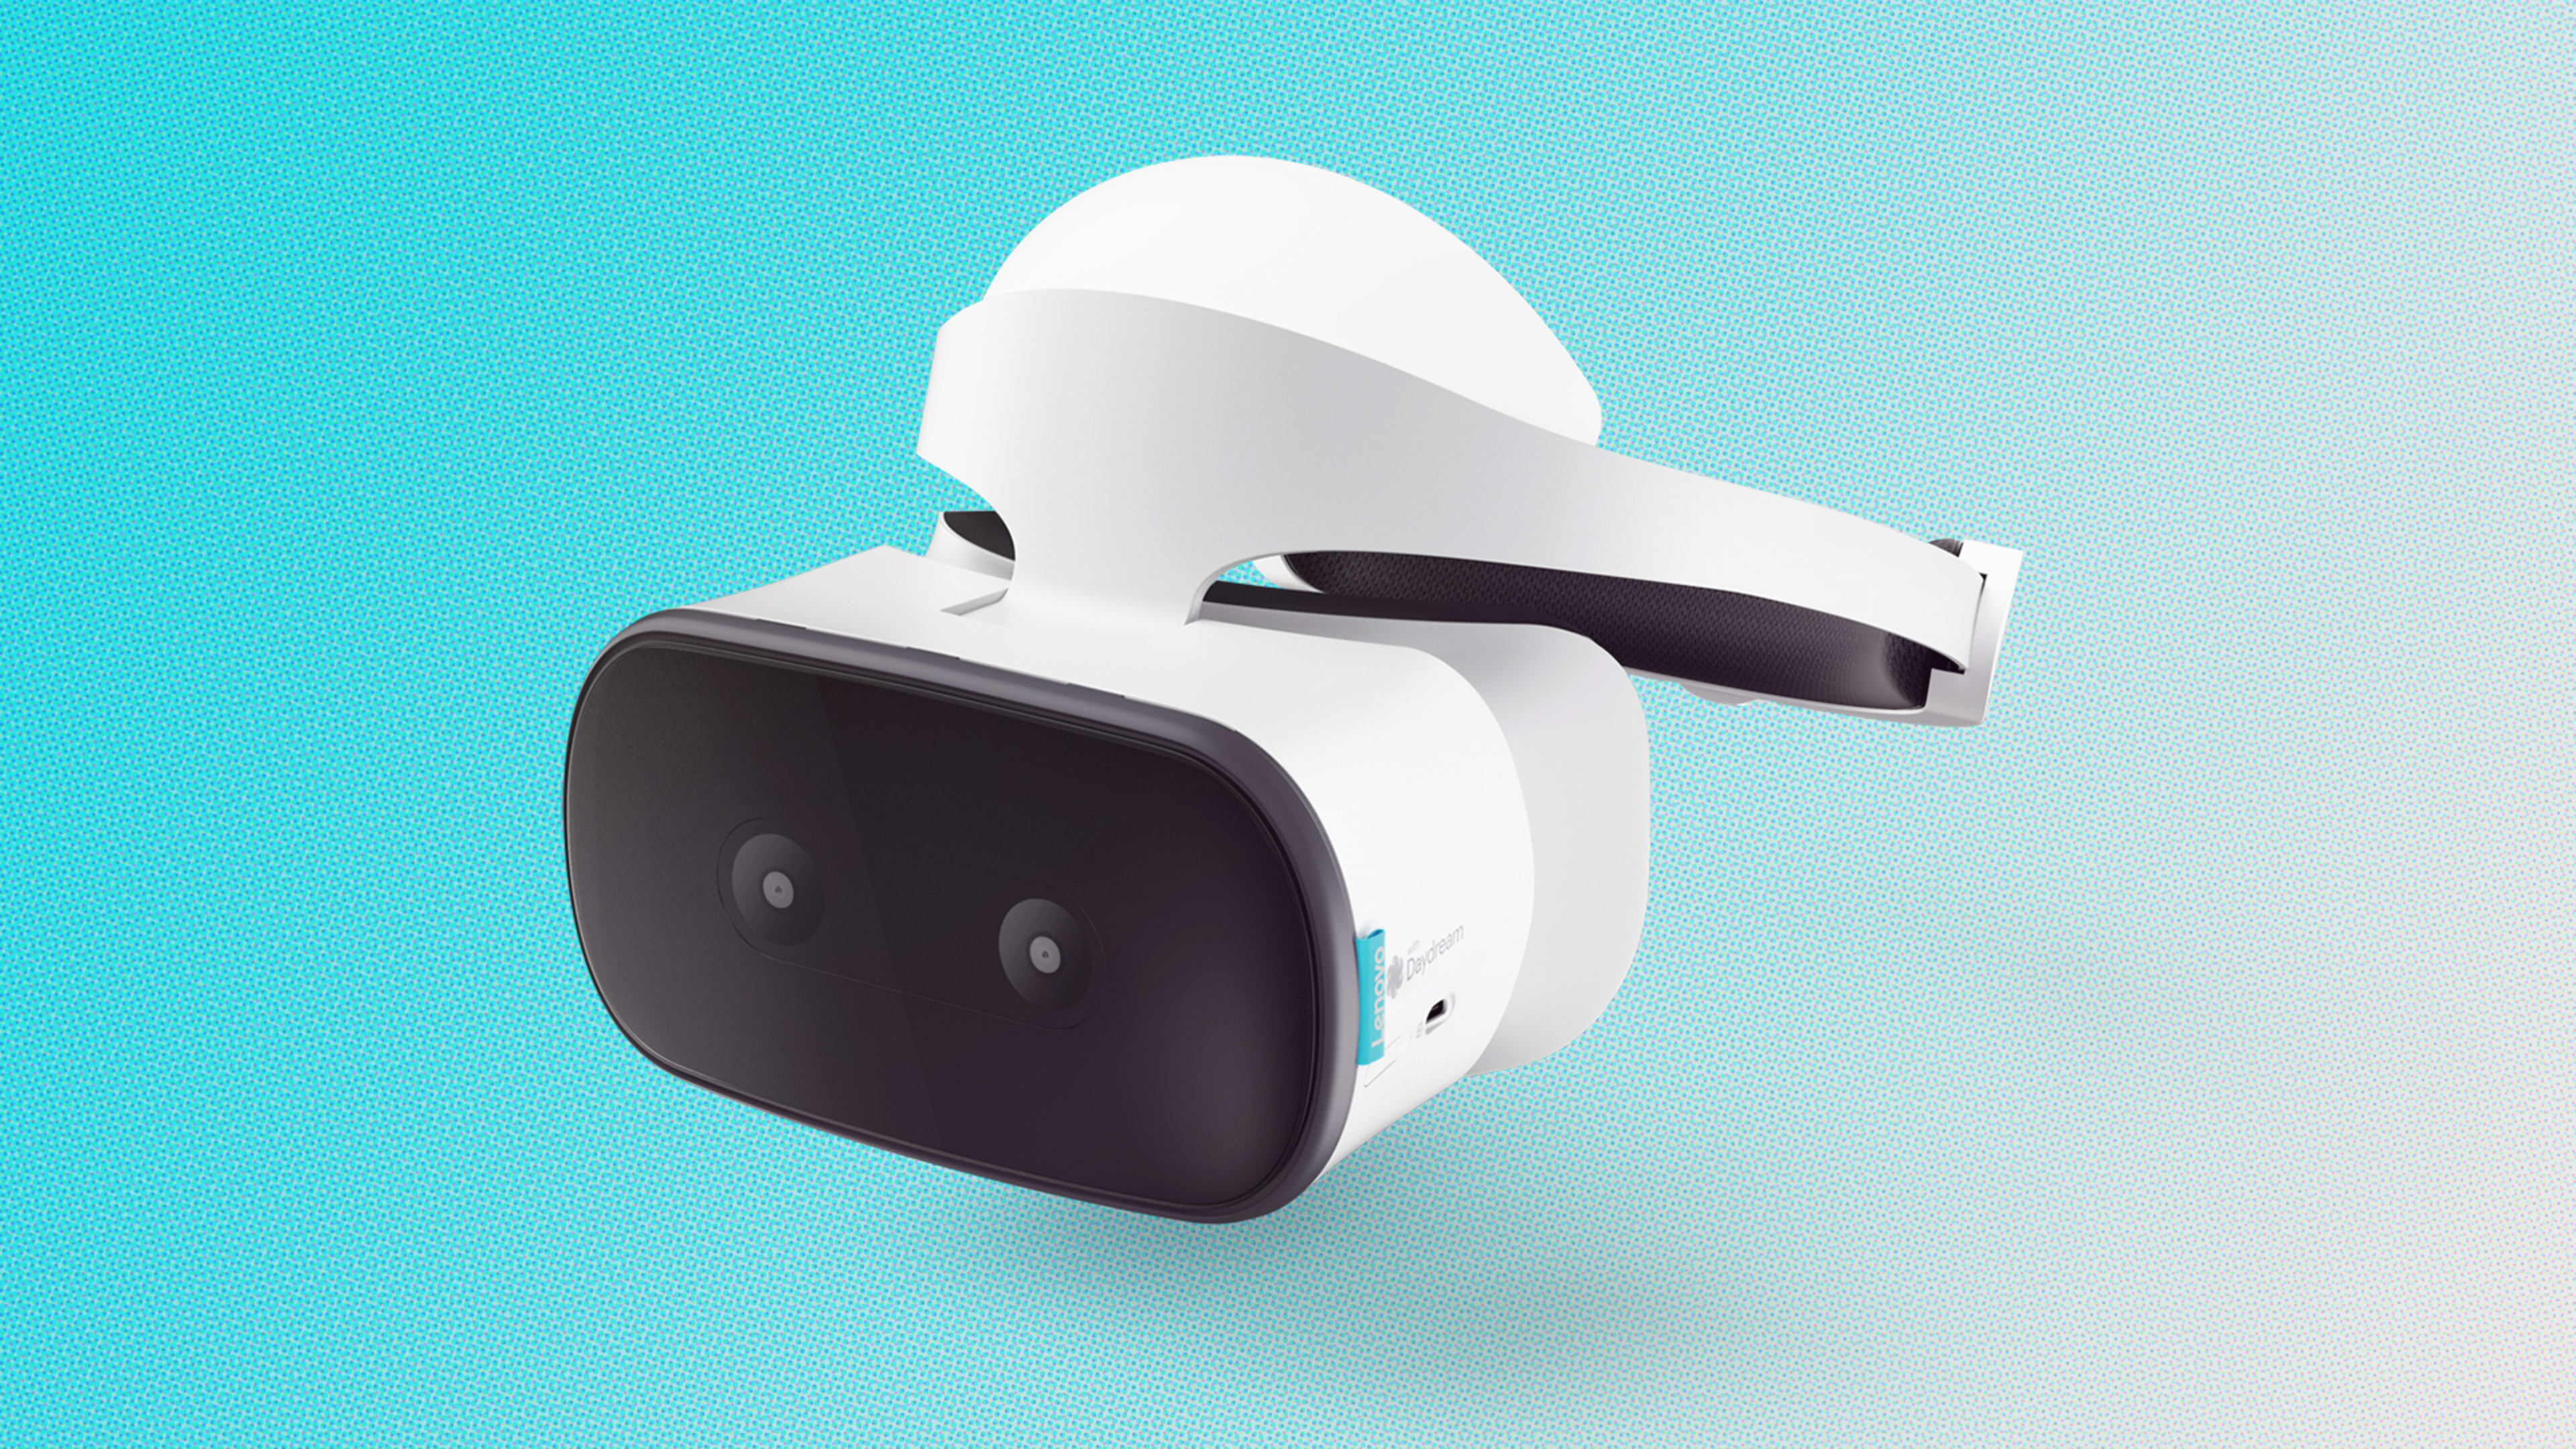 Google And Lenovo Unveil The First High-Quality Stand-Alone VR Headset